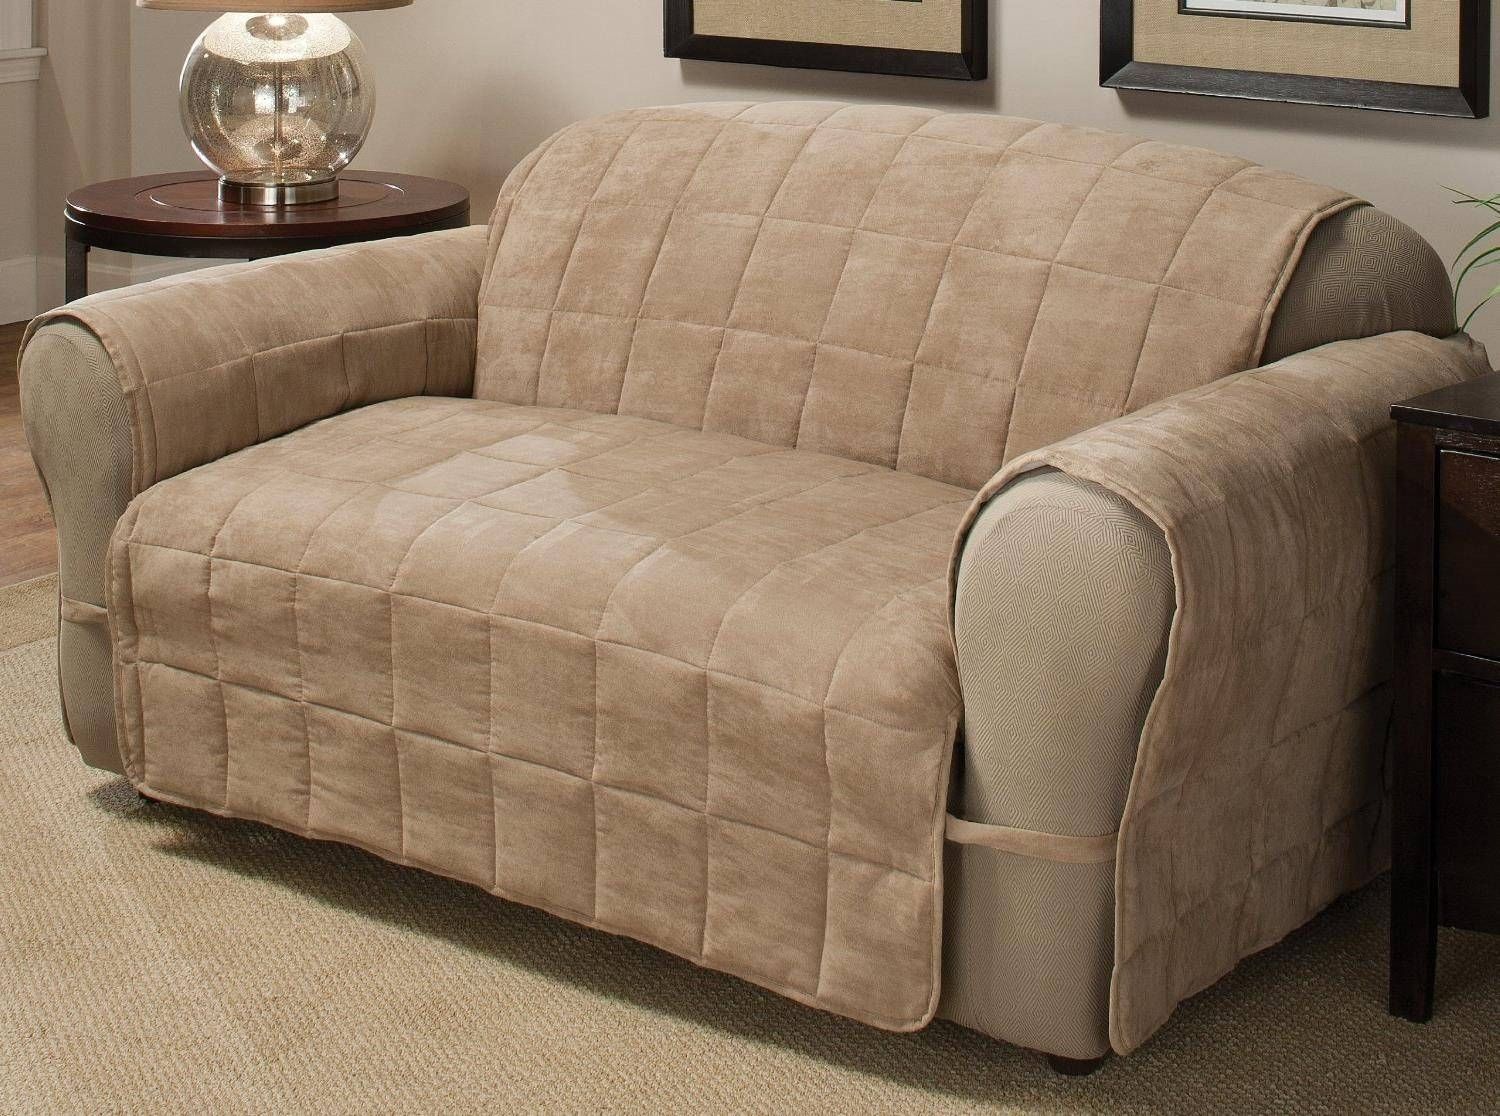 Modren Couch Covers Canada Of Sofas Centermarys Custom Made Sofa Within Slipcover For Leather Sectional Sofas 